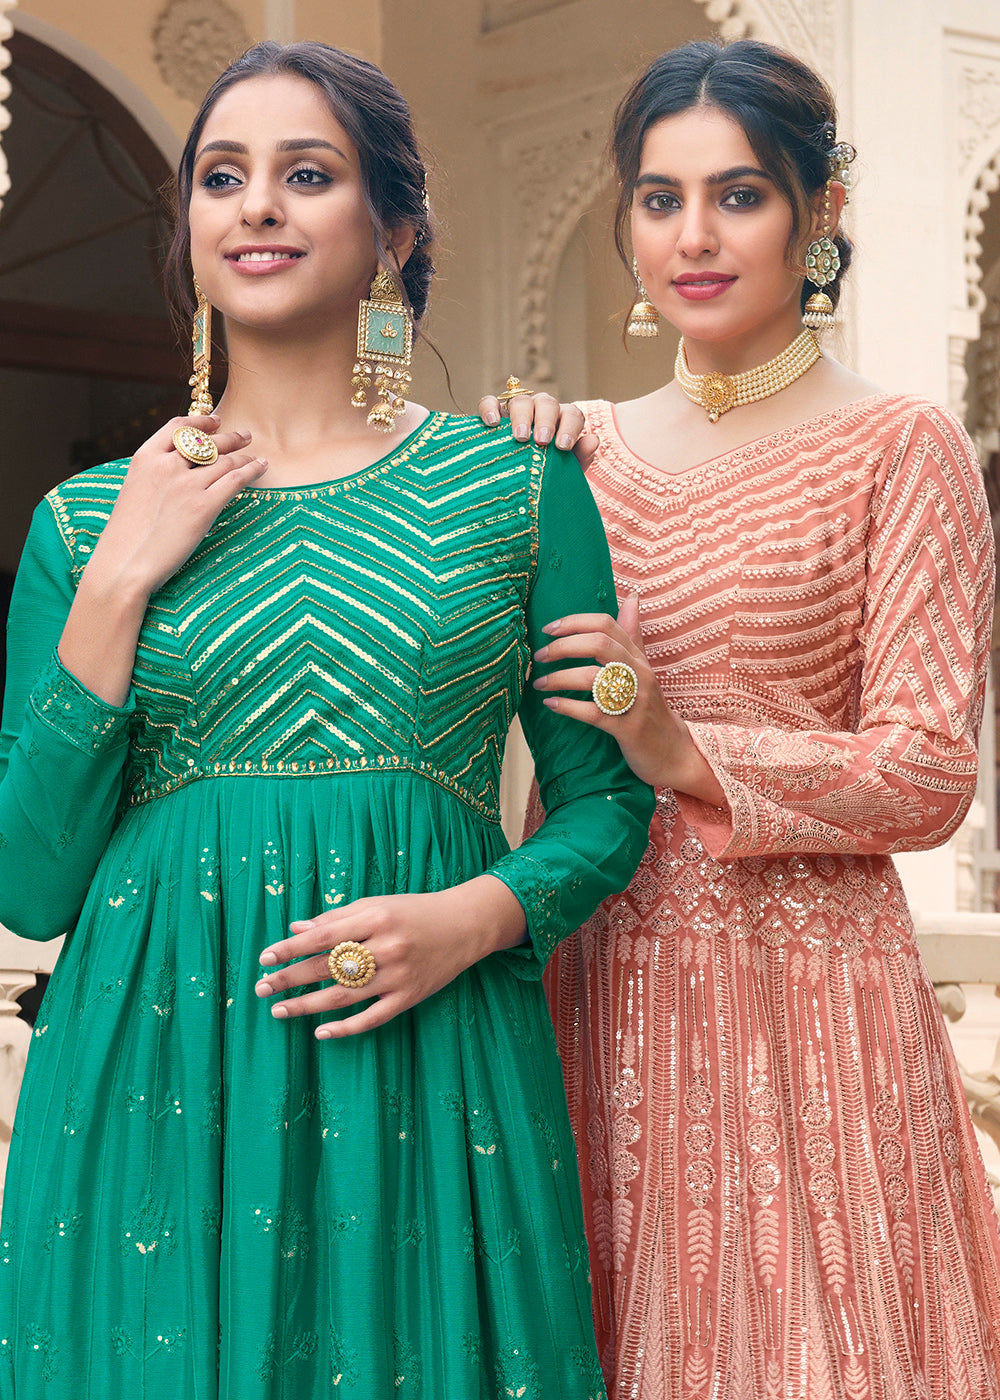 Buy Now Embroidered Aqua Green Function Wear Anarkali Gown Online in USA, UK, Australia, New Zealand, Canada, Italy & Worldwide at Empress Clothing. 